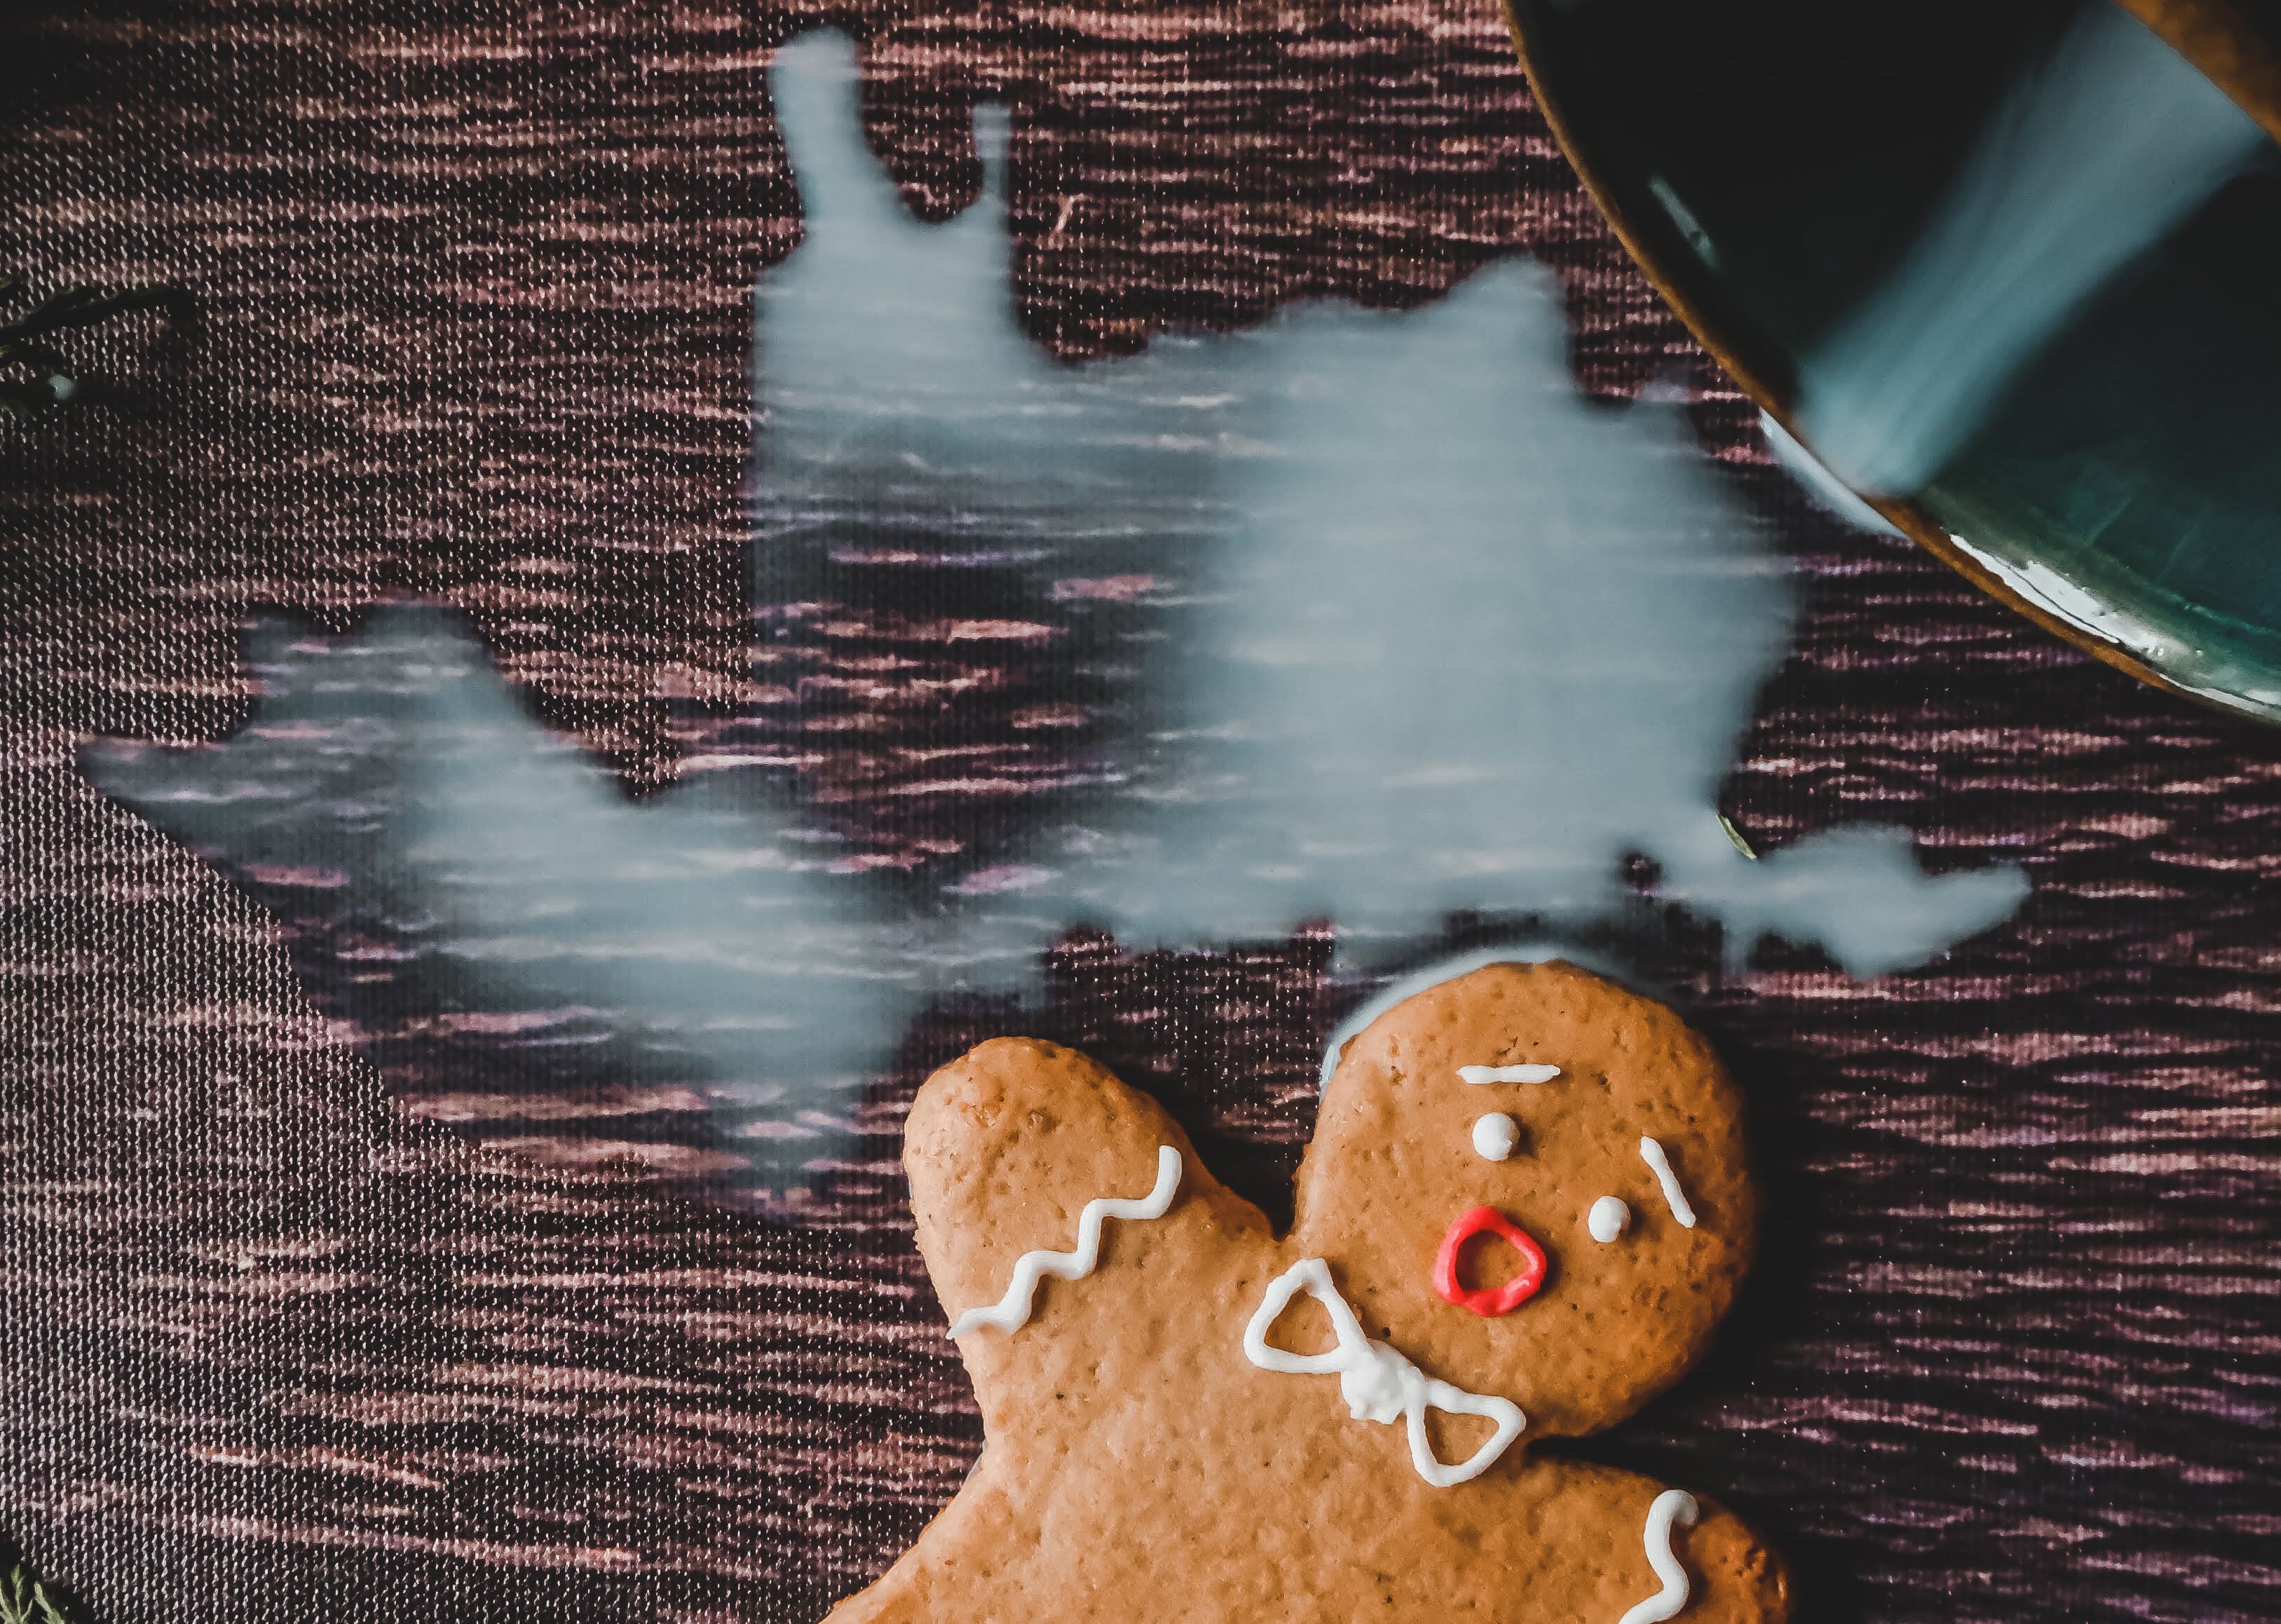 Spilled milk on a table beside a gingerbread man